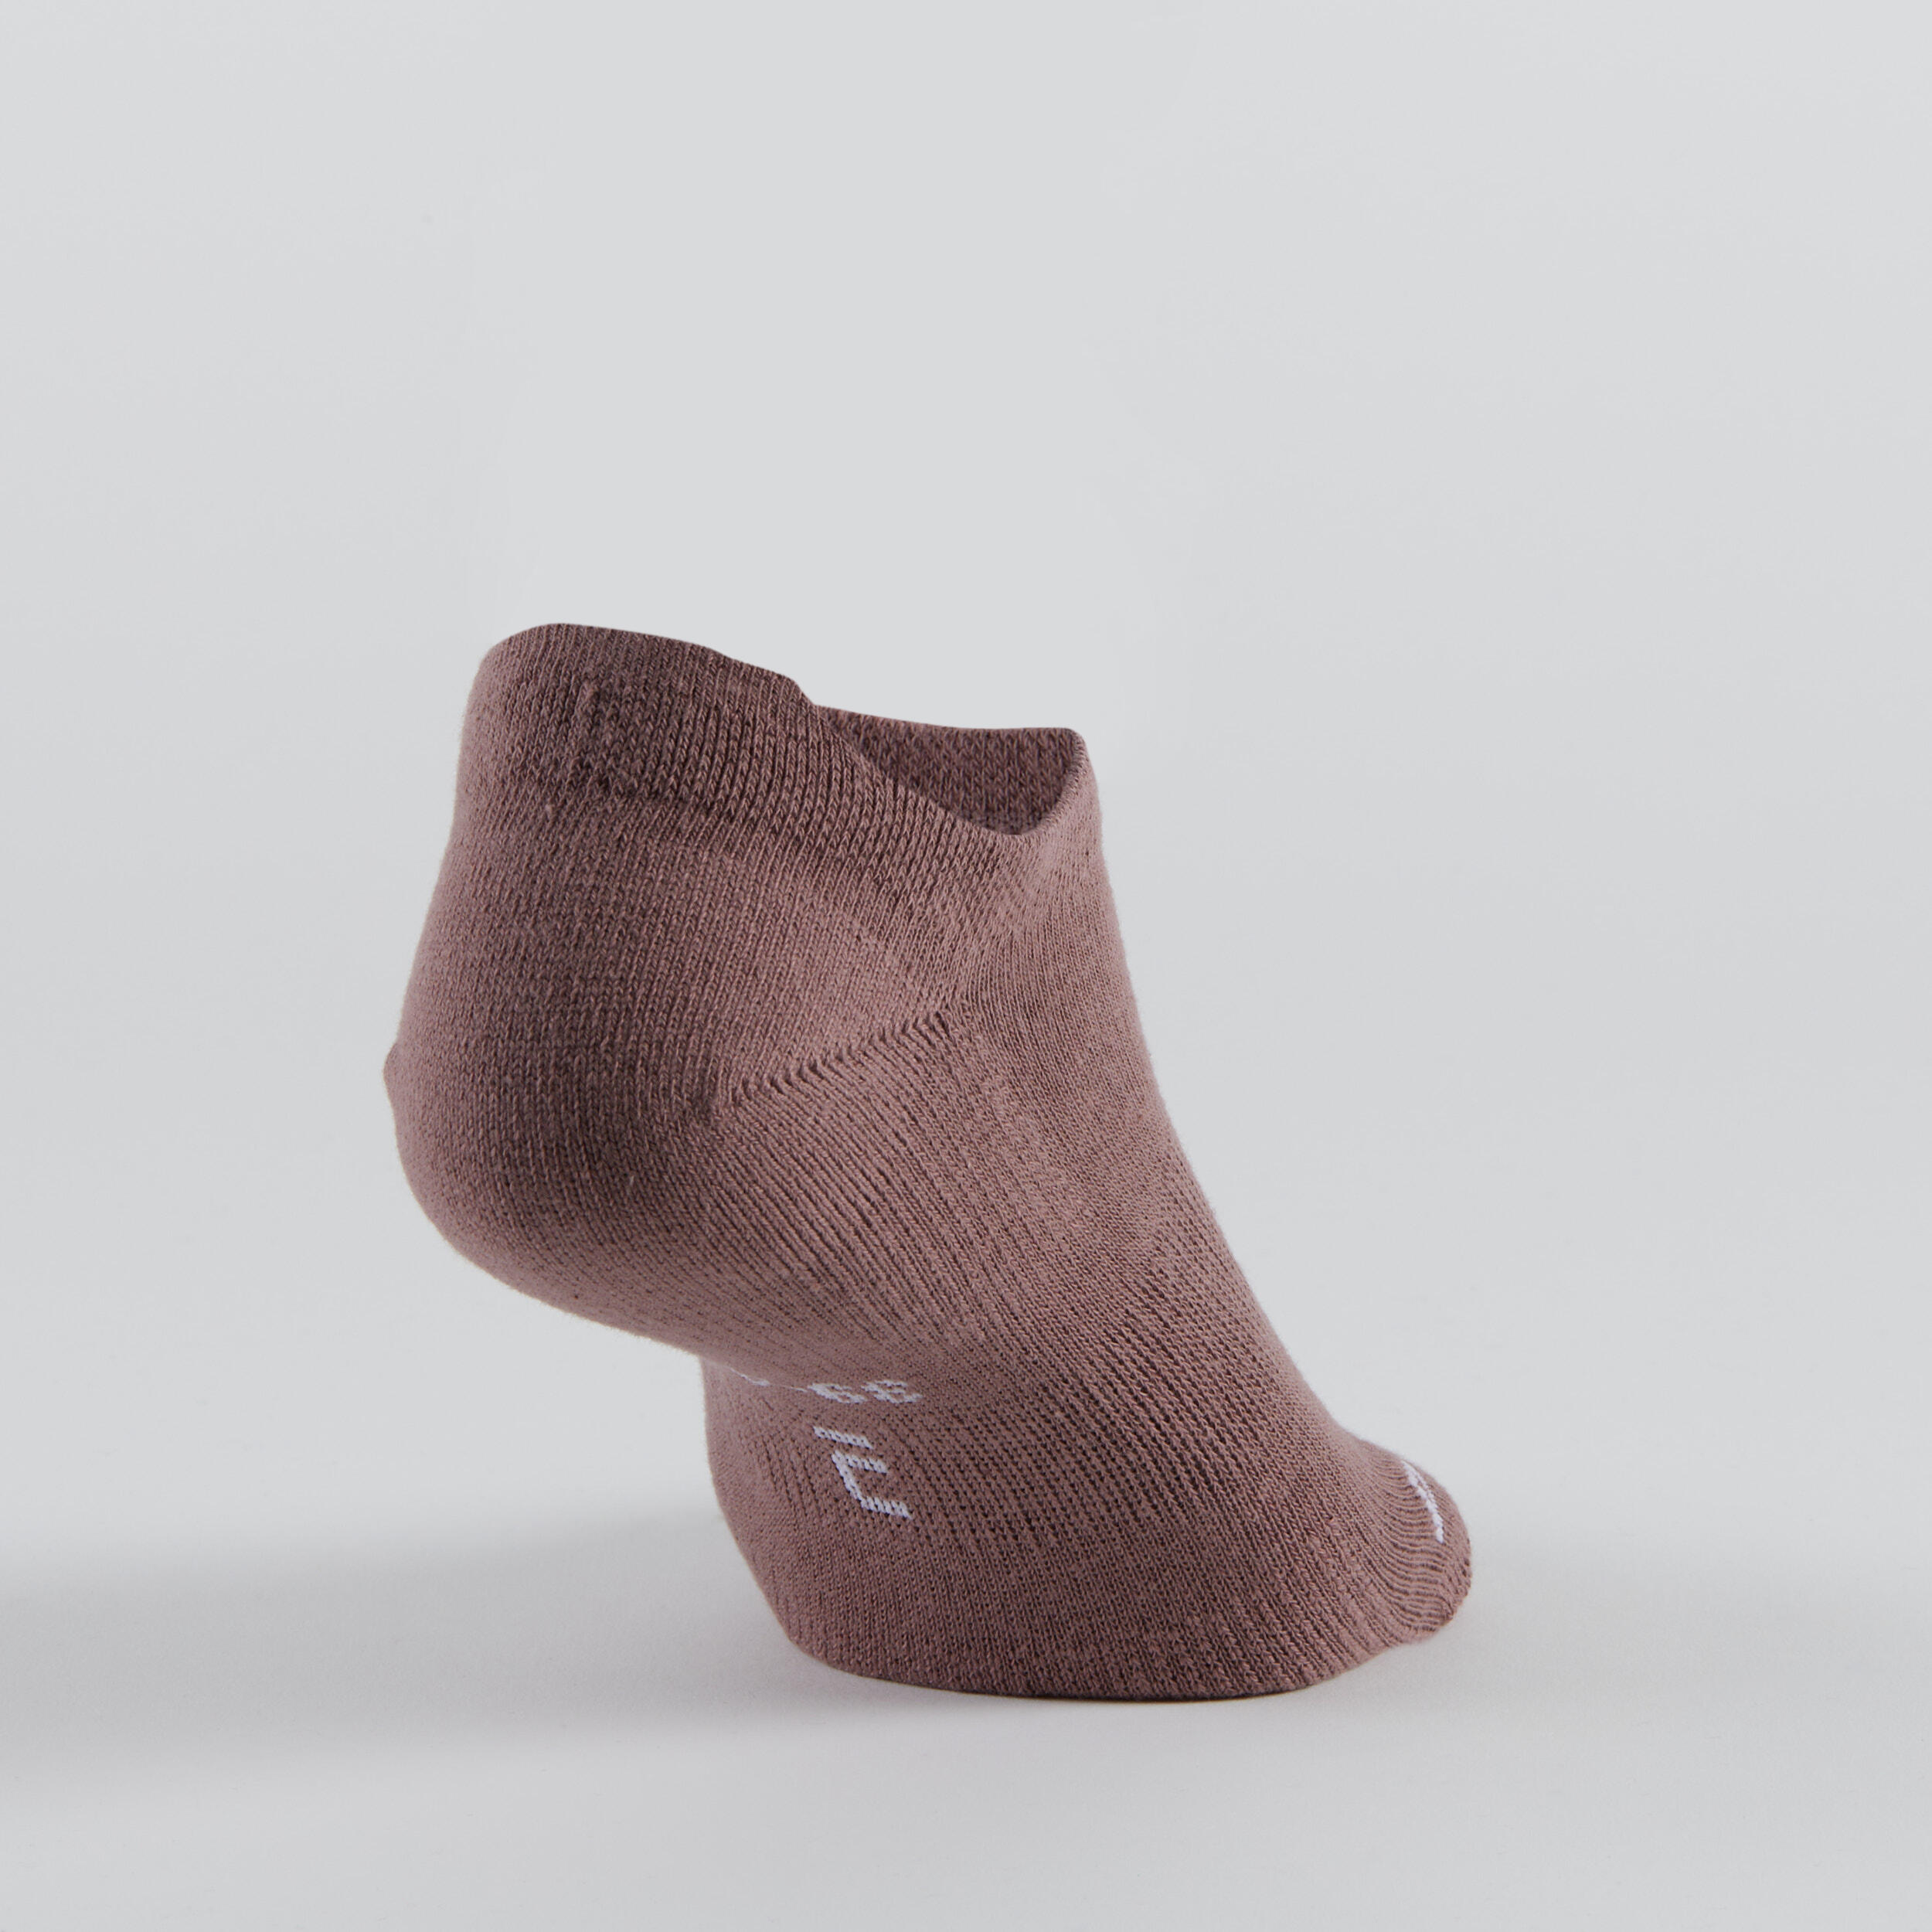 Low Sports Socks Tri-Pack RS 160 - Camo/Taupe/White 12/14